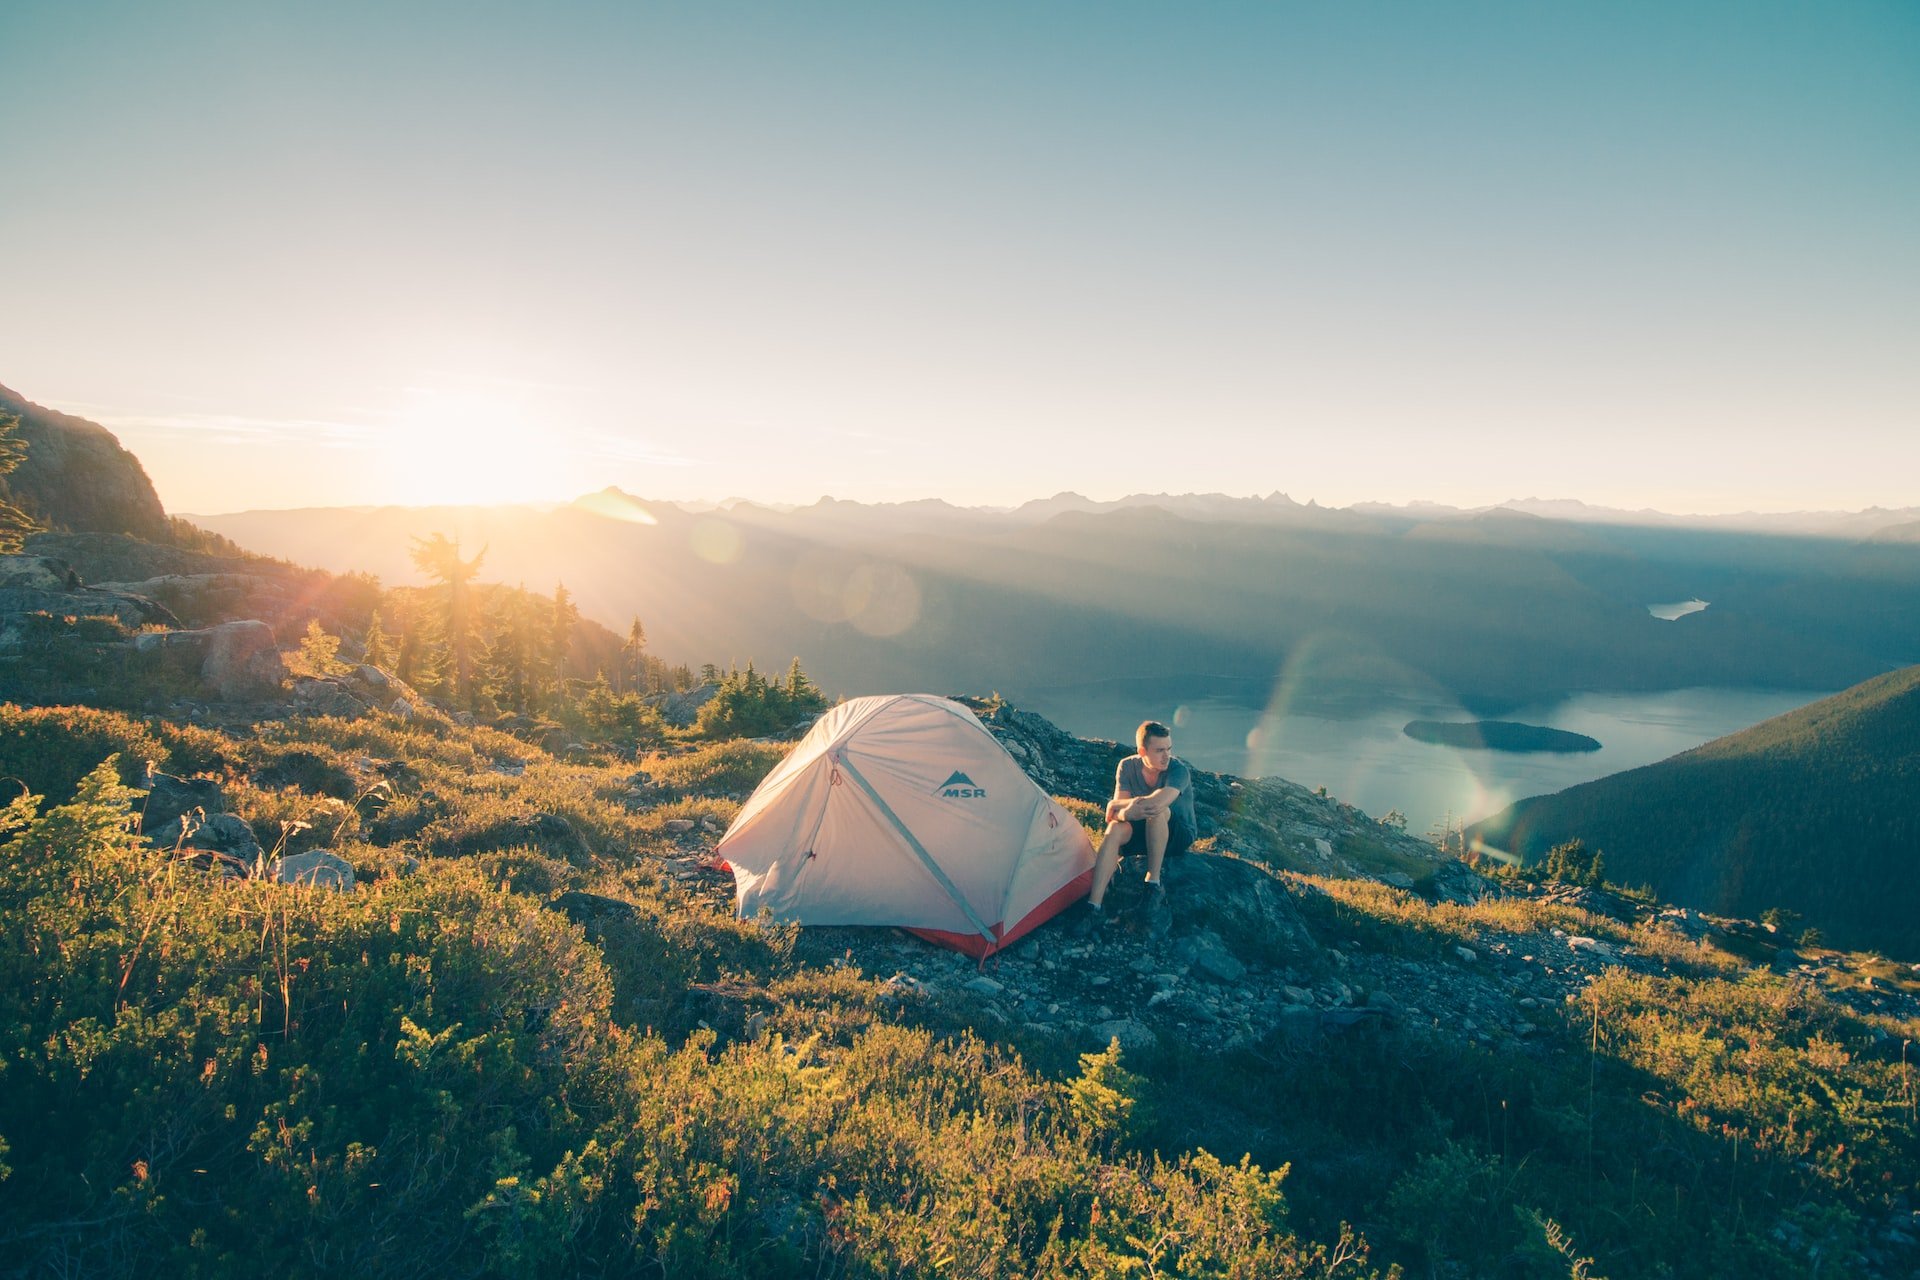 Man with tent at sunset in Golden Ears Provincial Park, Canada (photo: Glen Jackson)